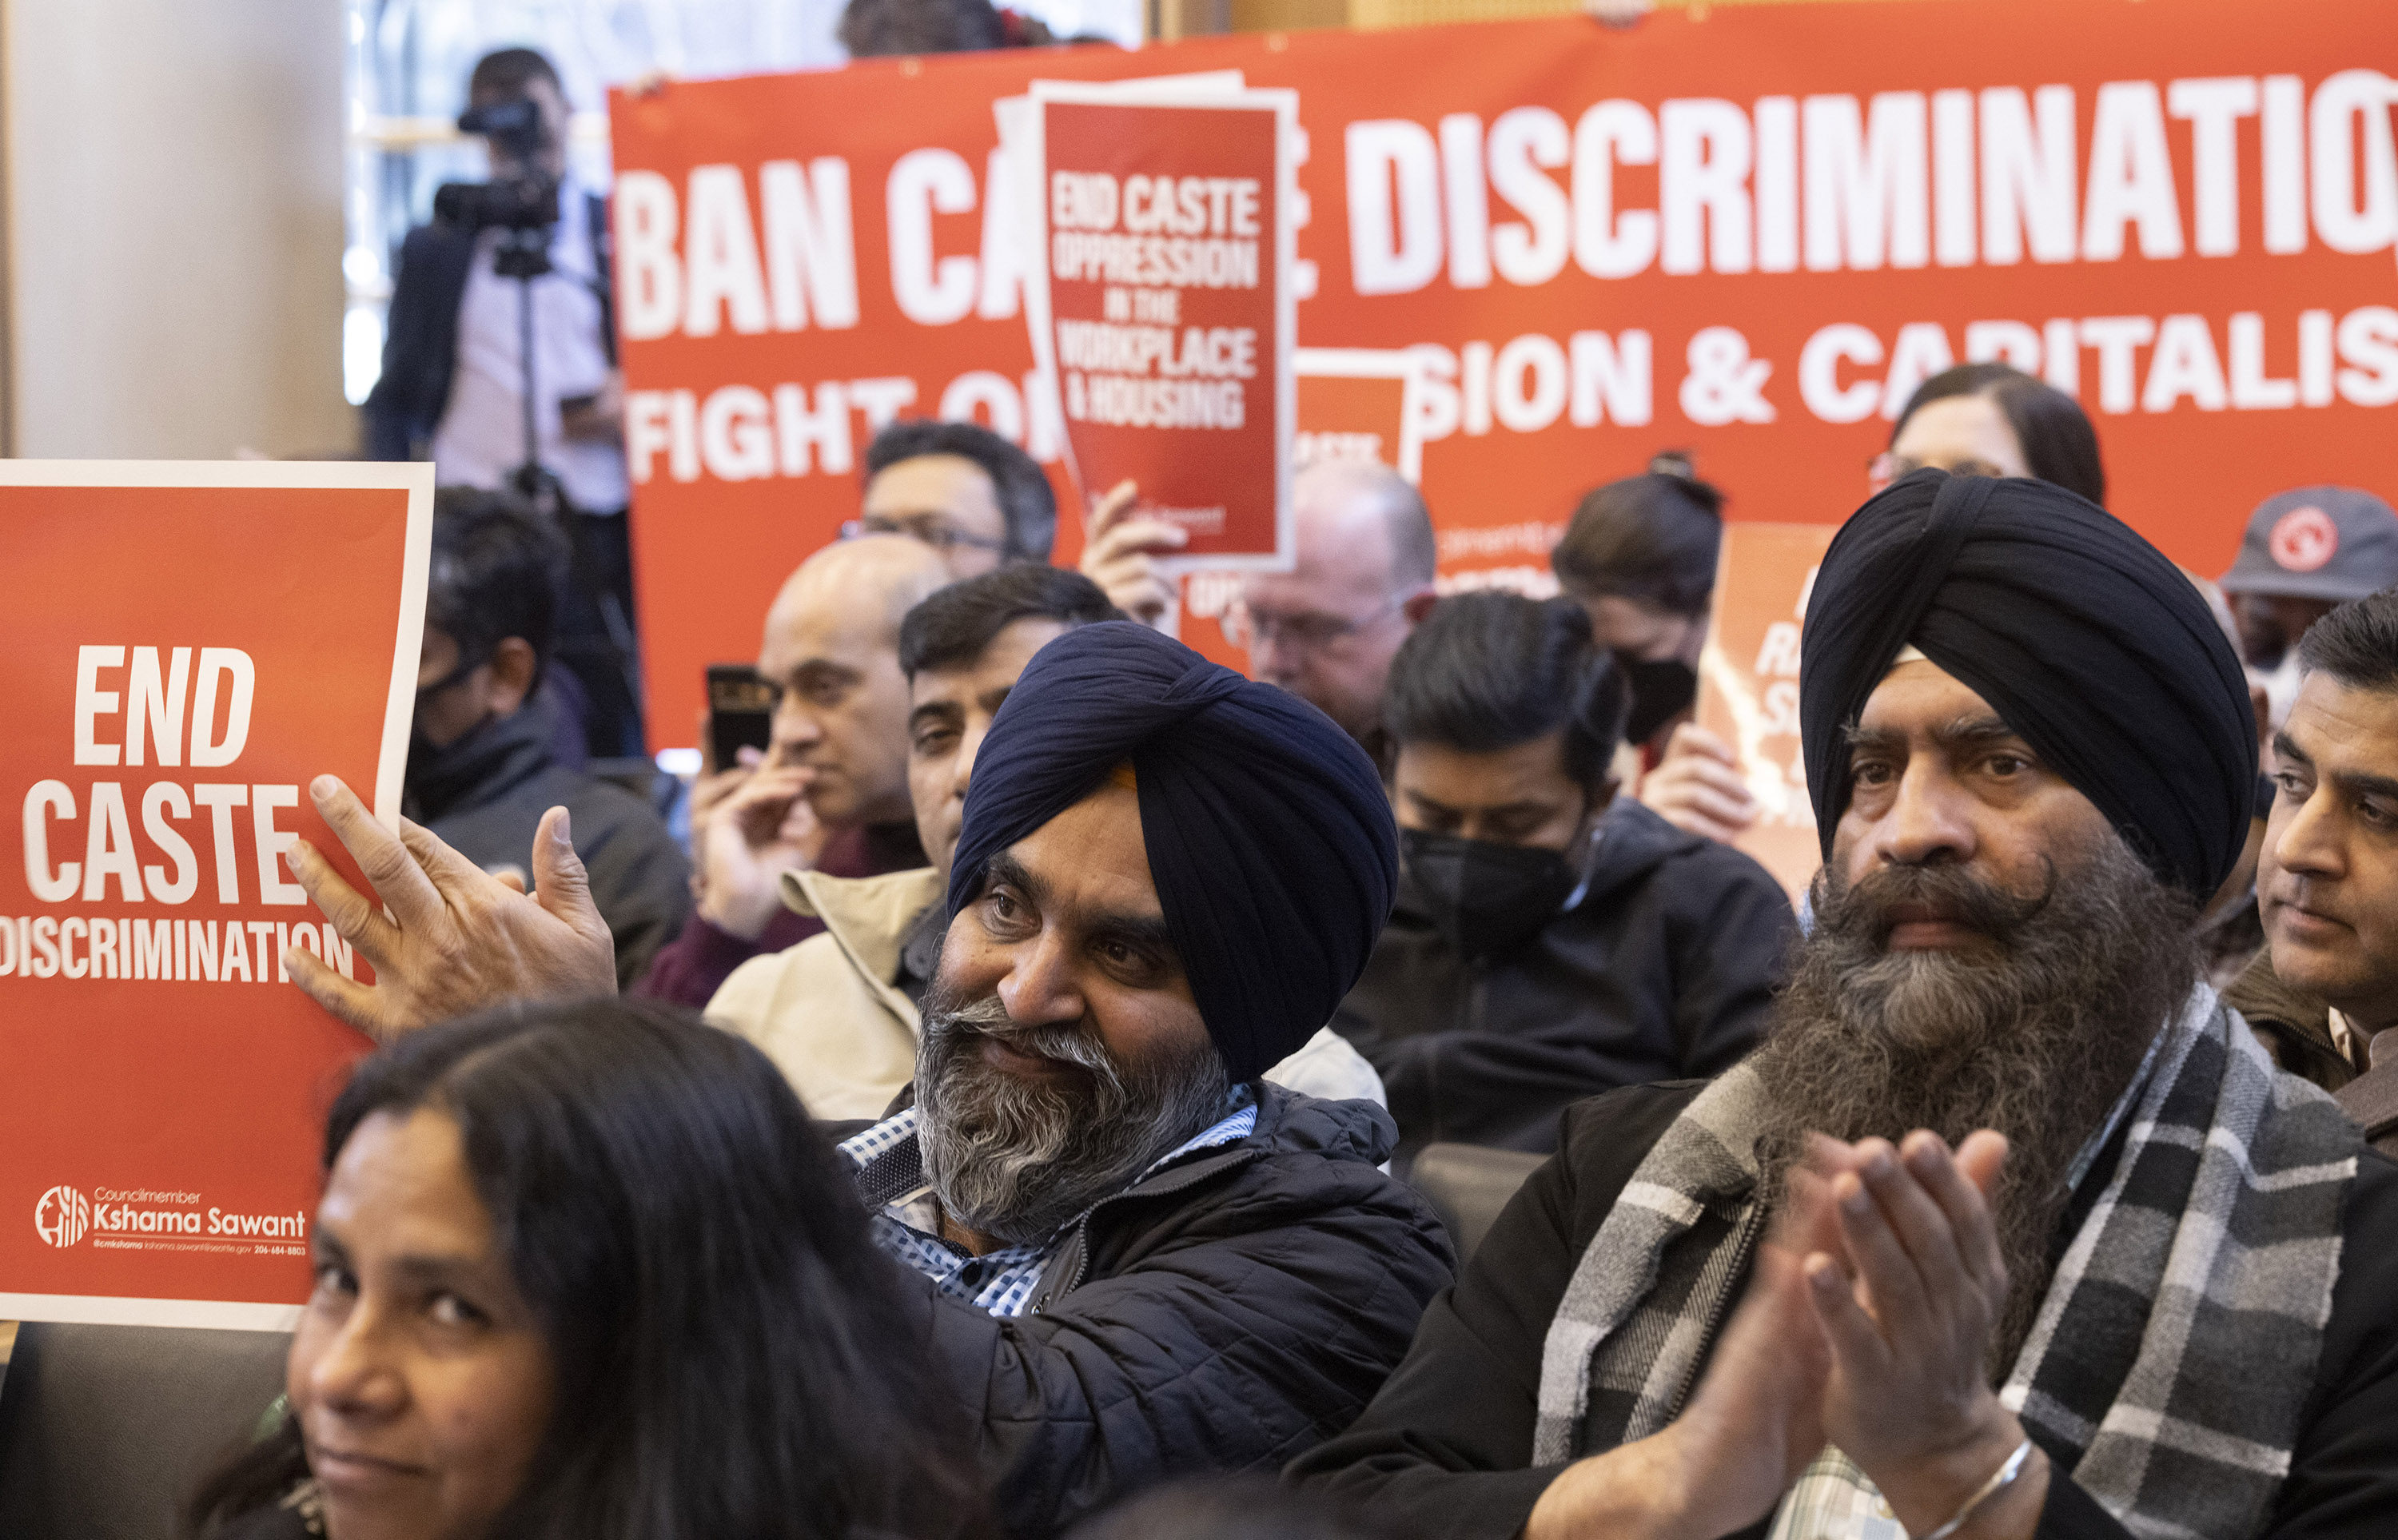 People applaud Seattle banning caste discrimination at a city council meeting last month. Photo: TNS